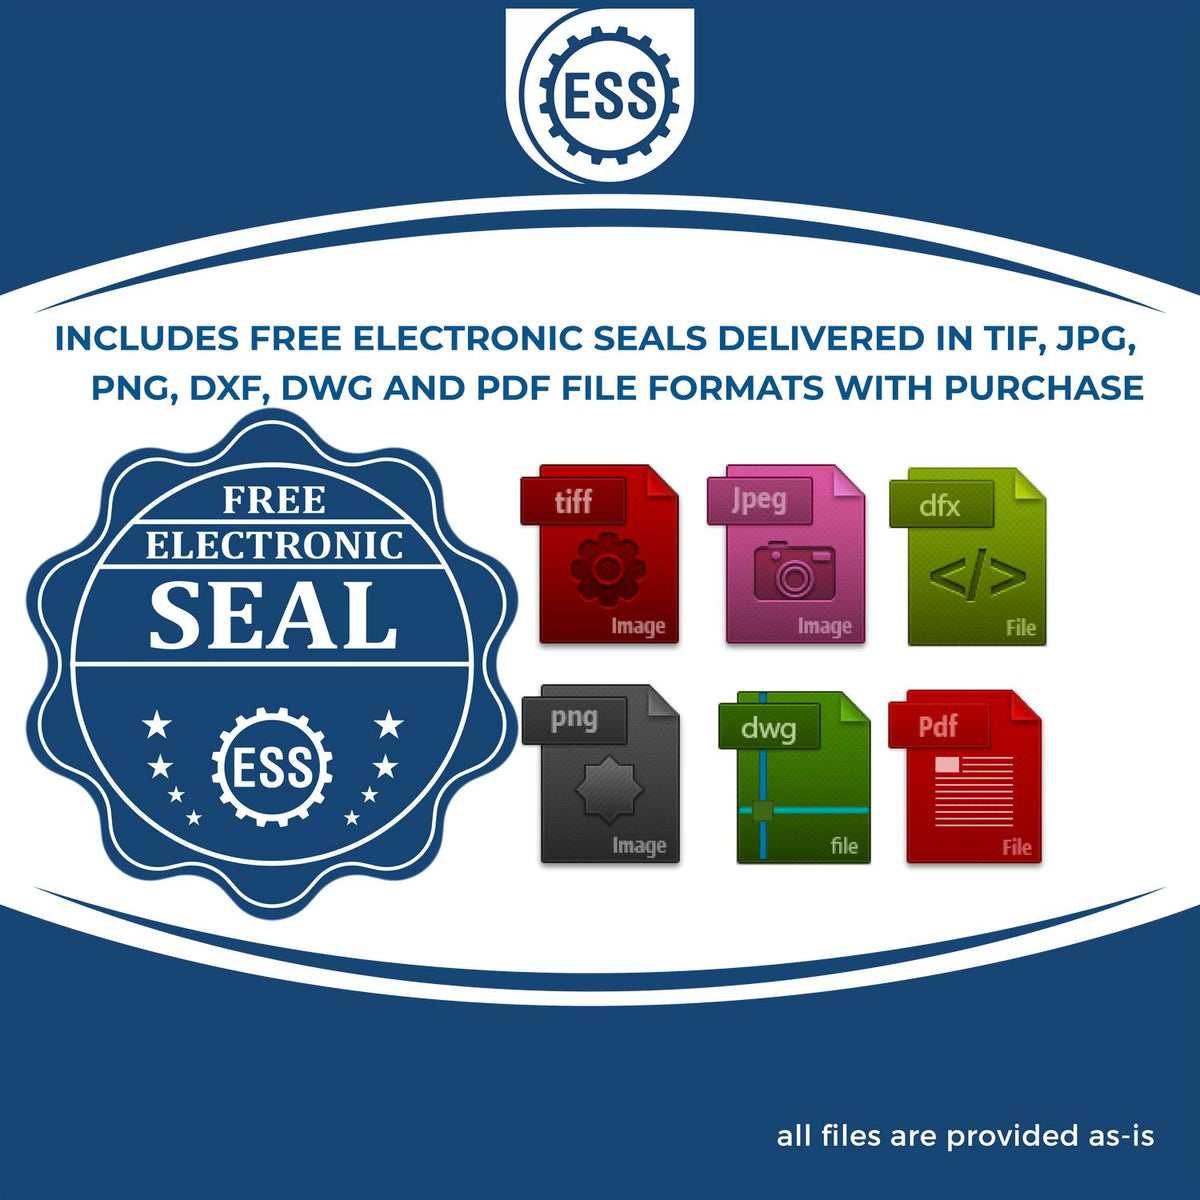 An infographic for the free electronic seal for the Heavy Duty Cast Iron Alabama Land Surveyor Seal Embosser illustrating the different file type icons such as DXF, DWG, TIF, JPG and PNG.